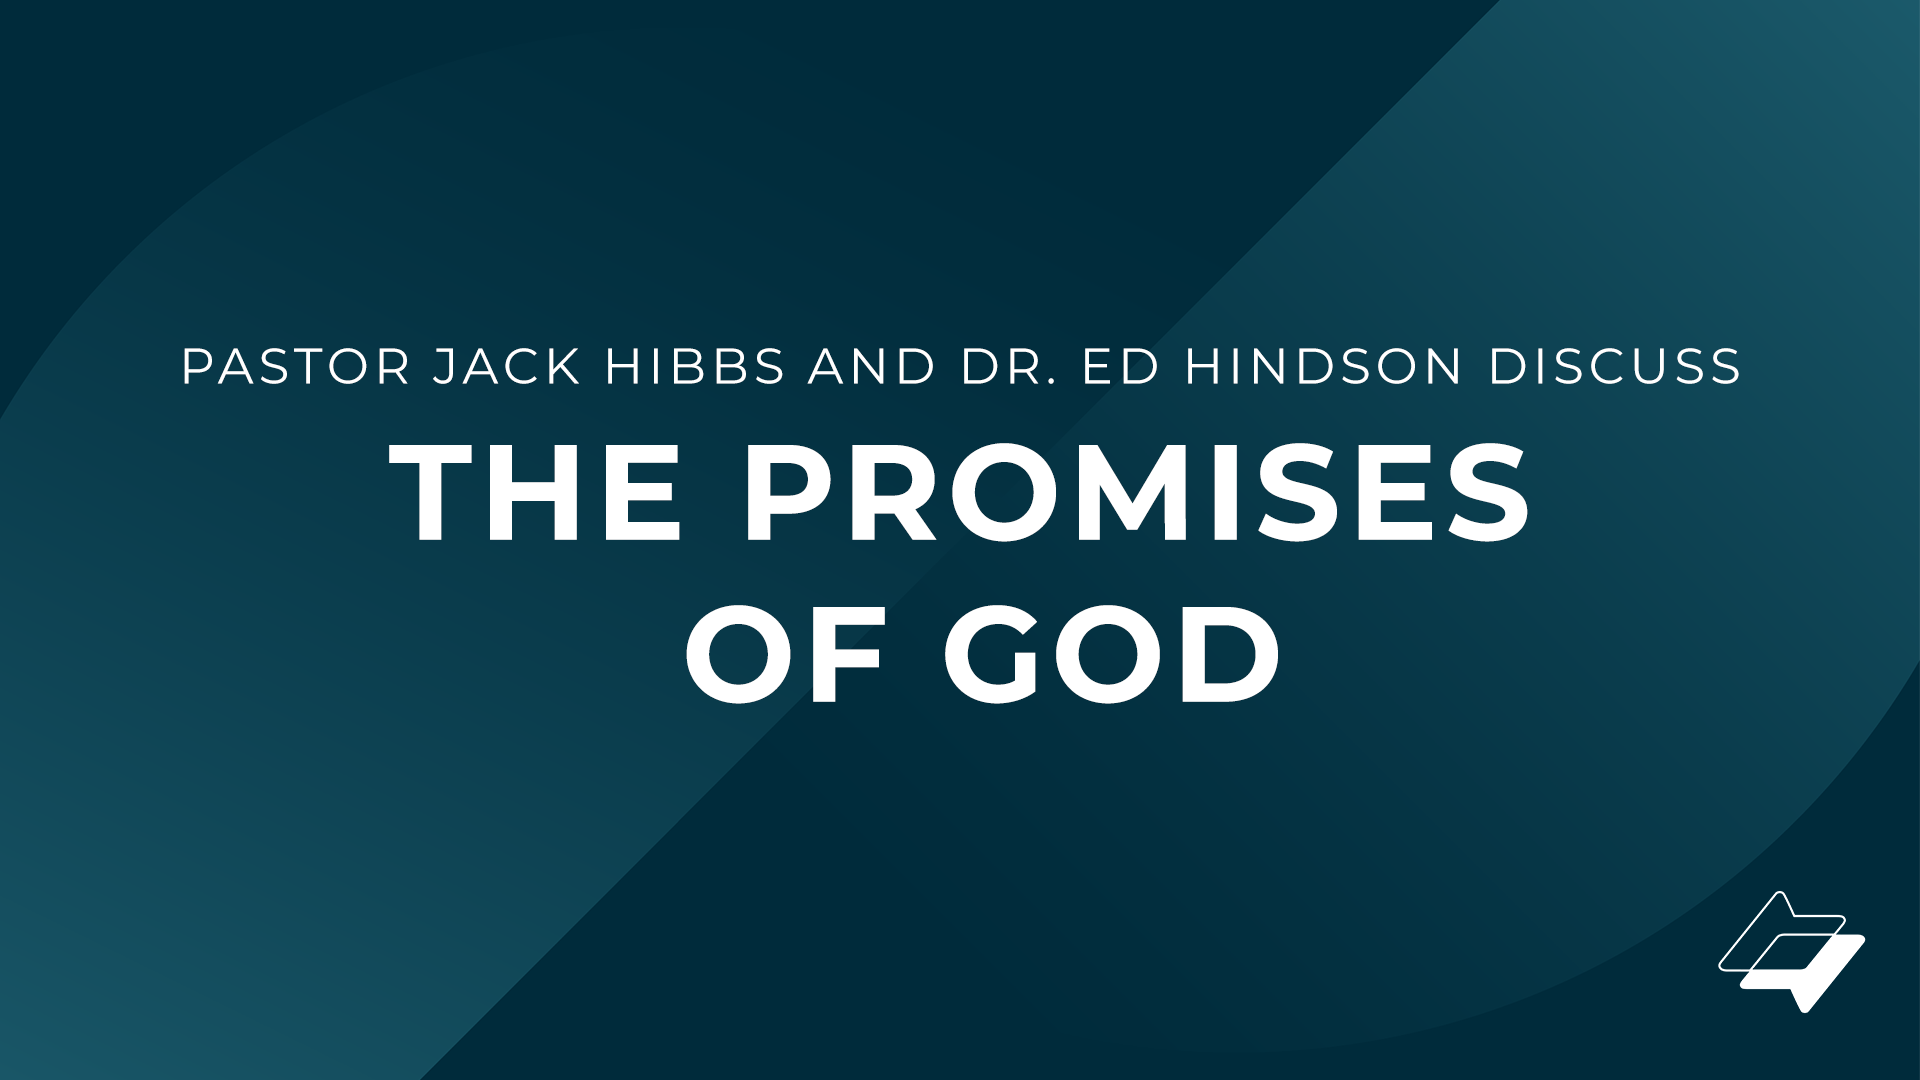 Pastor Jack and Dr. Ed Hindson discuss the promises of God